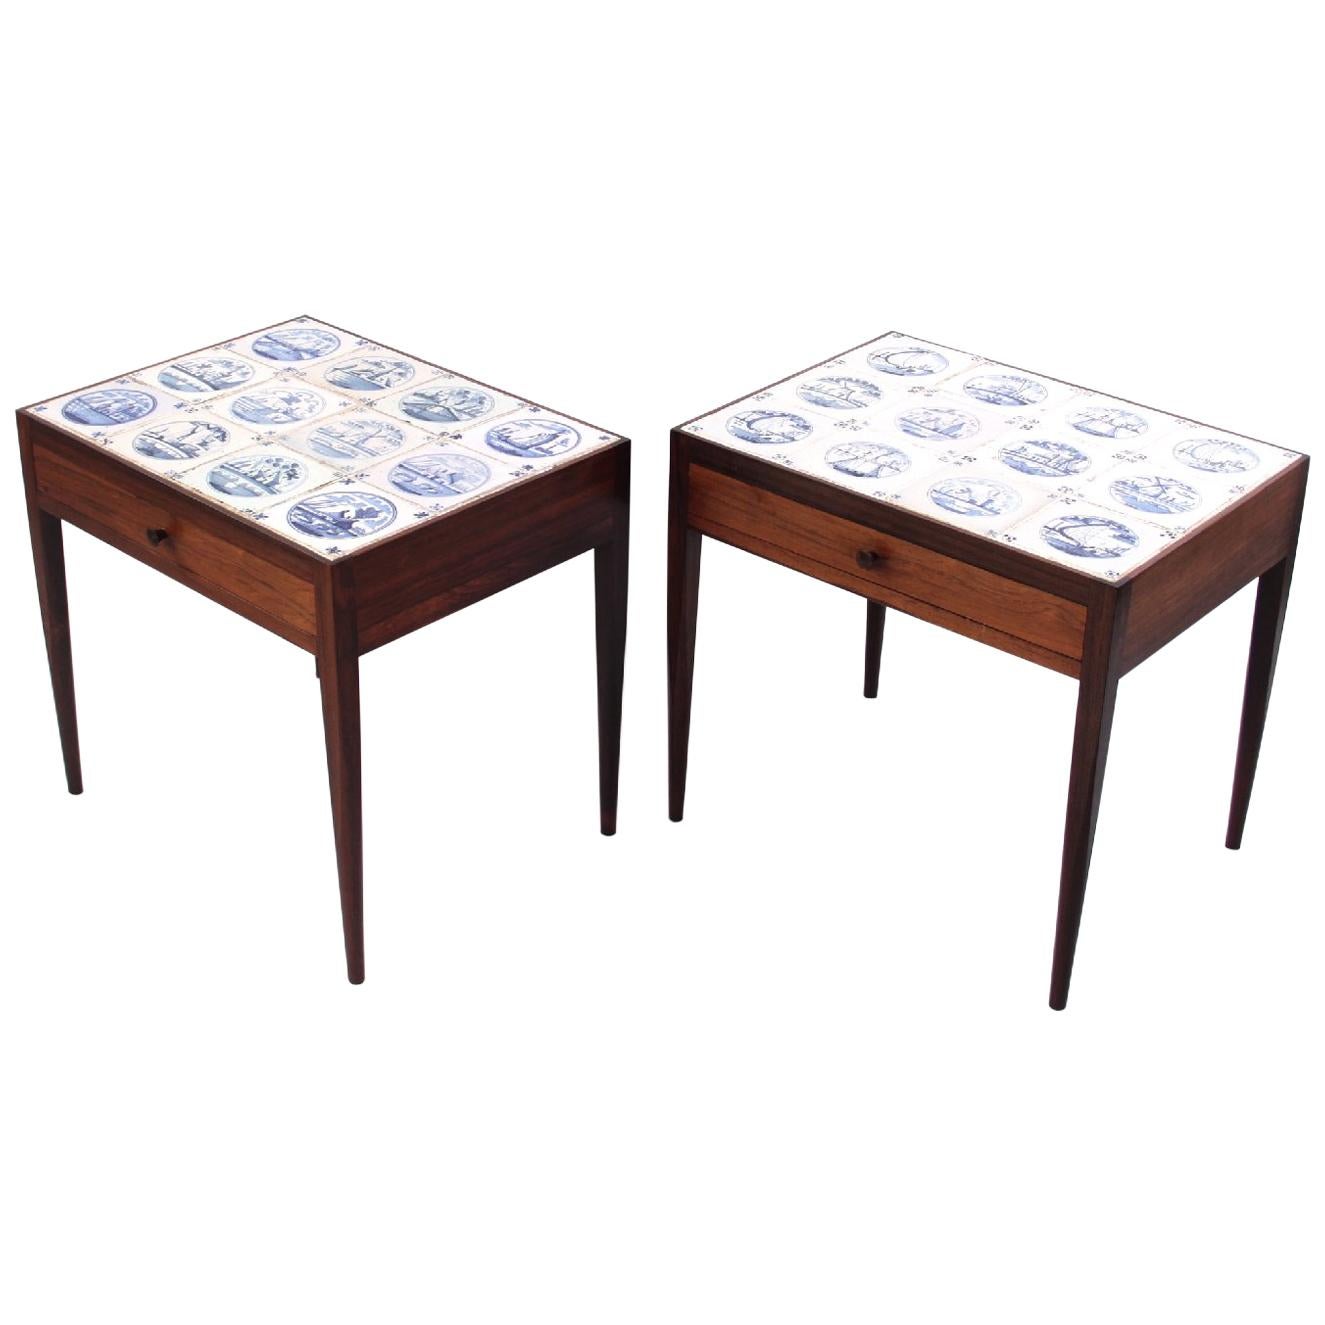 Niels Vodder Pair of Side Tables in Rosewood and Antique Delft Tiles